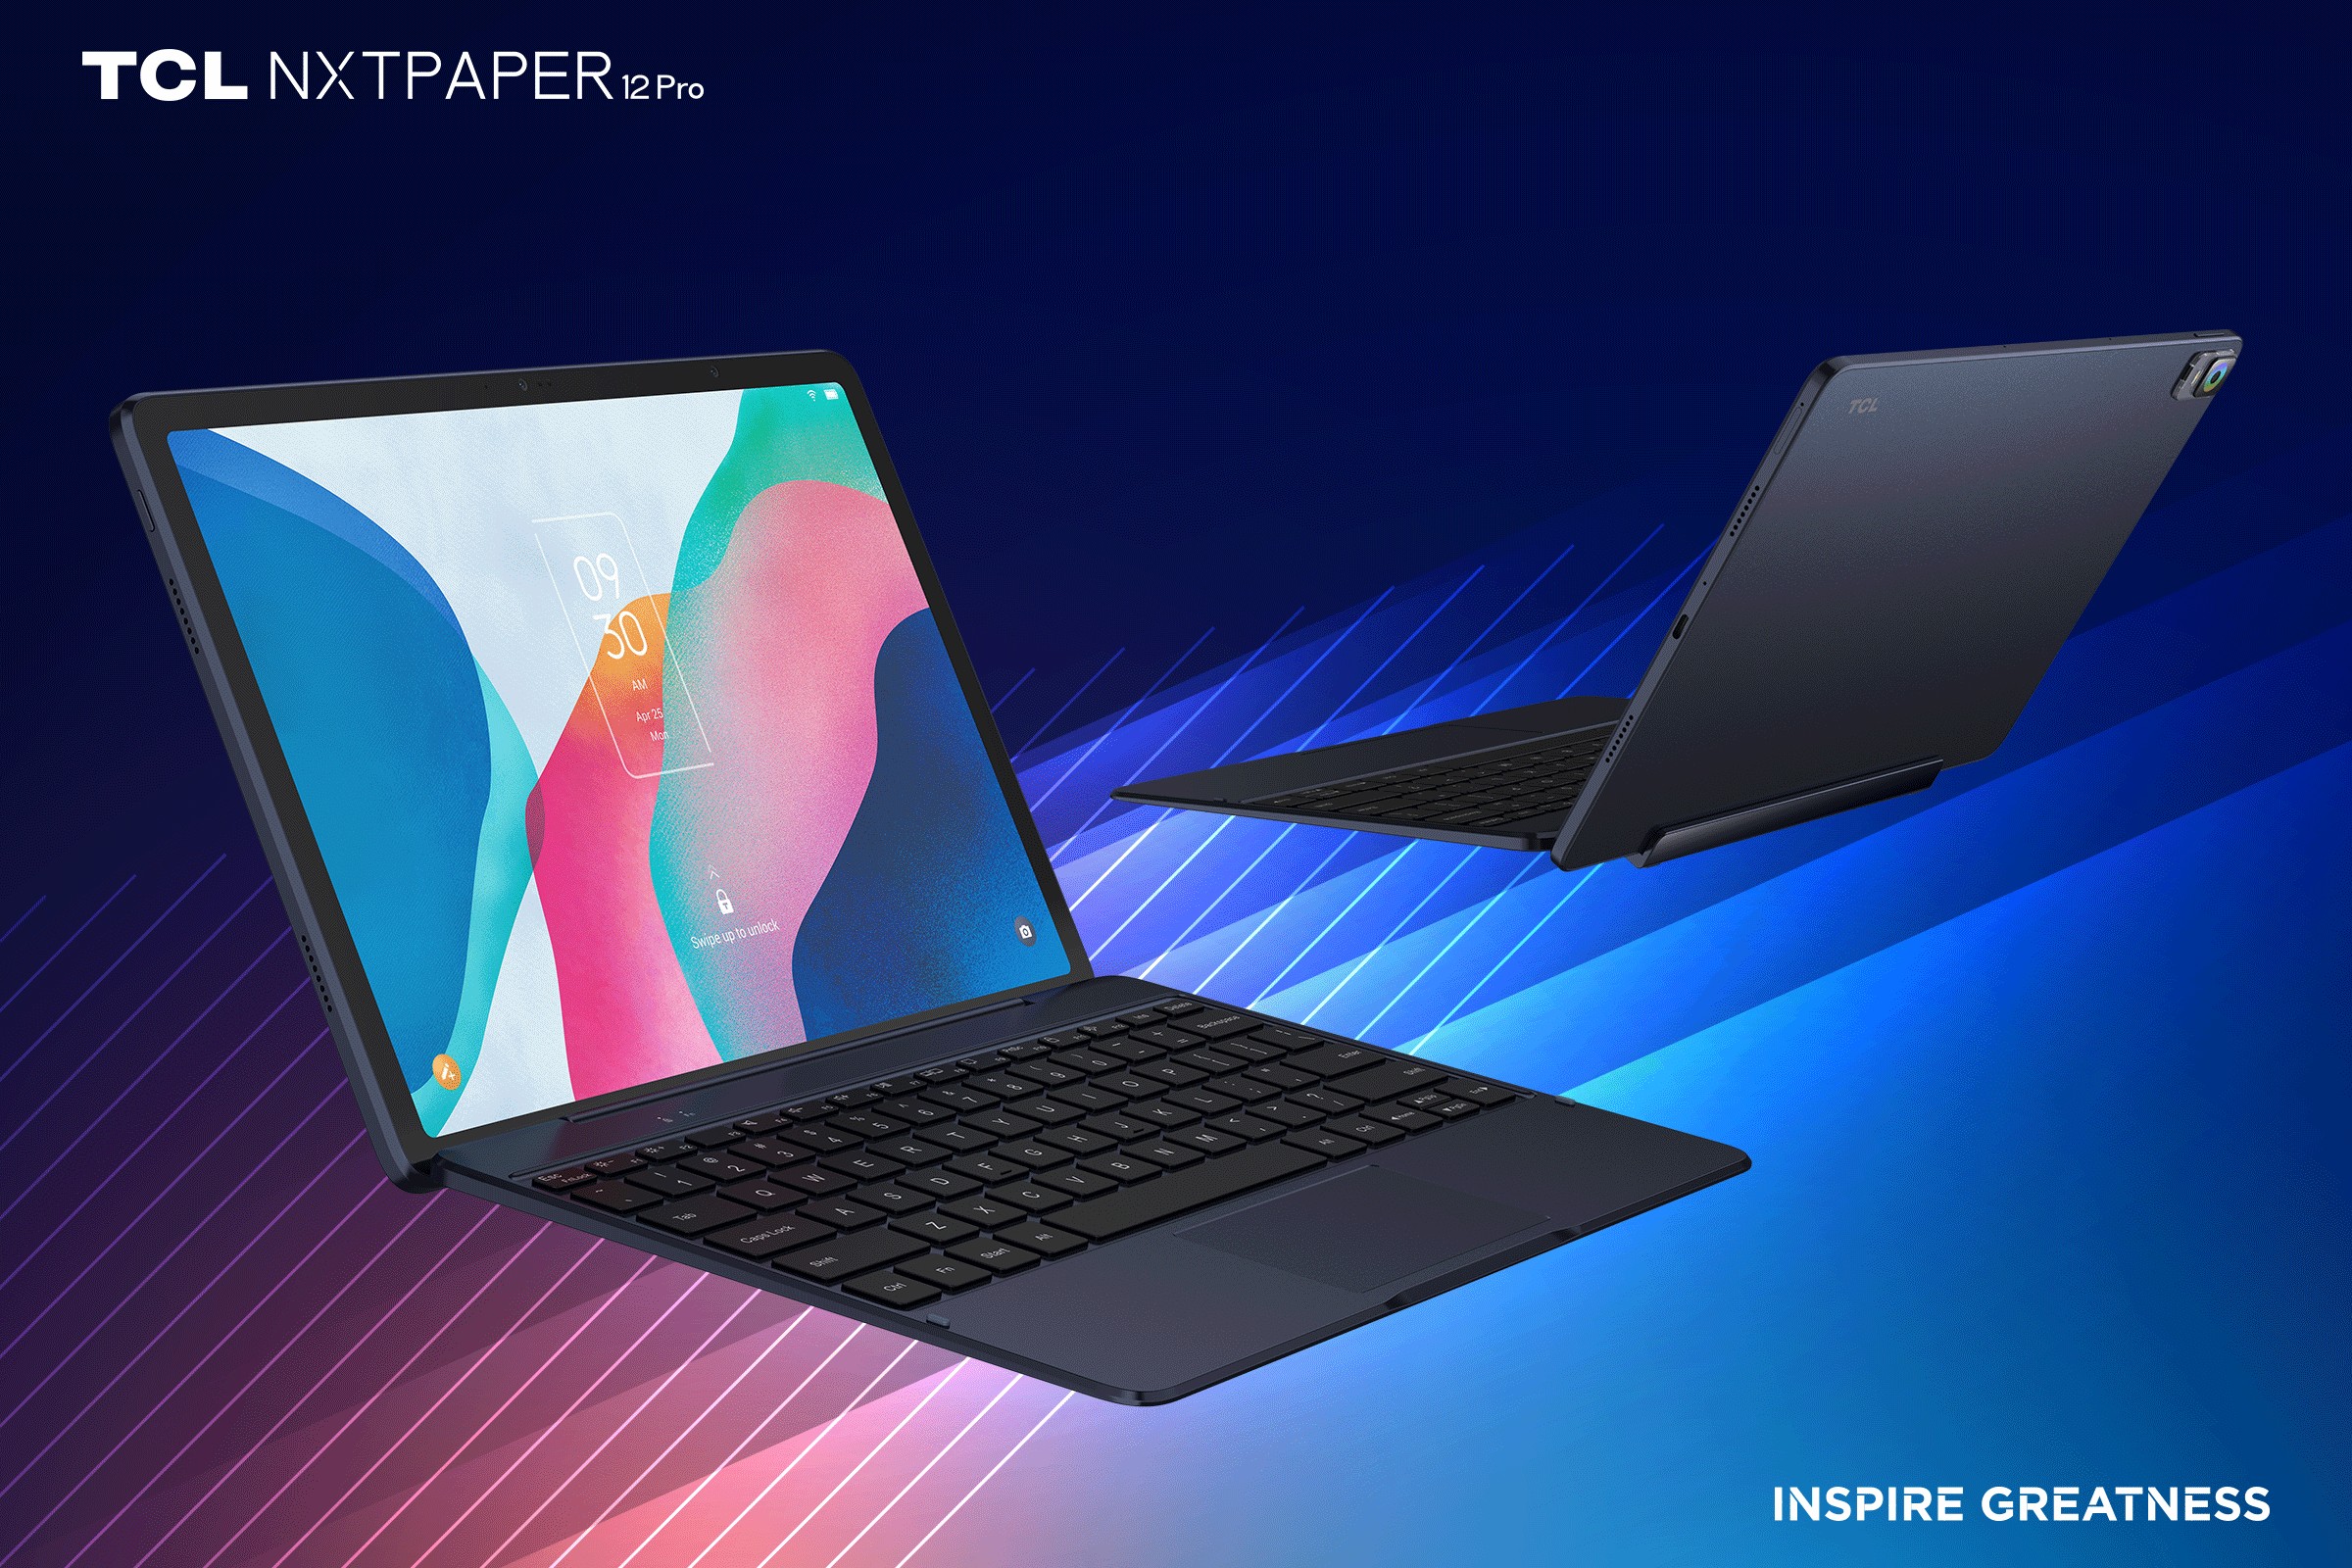 TCL Nxtpaper 12 Pro with the official keyboard accessory.